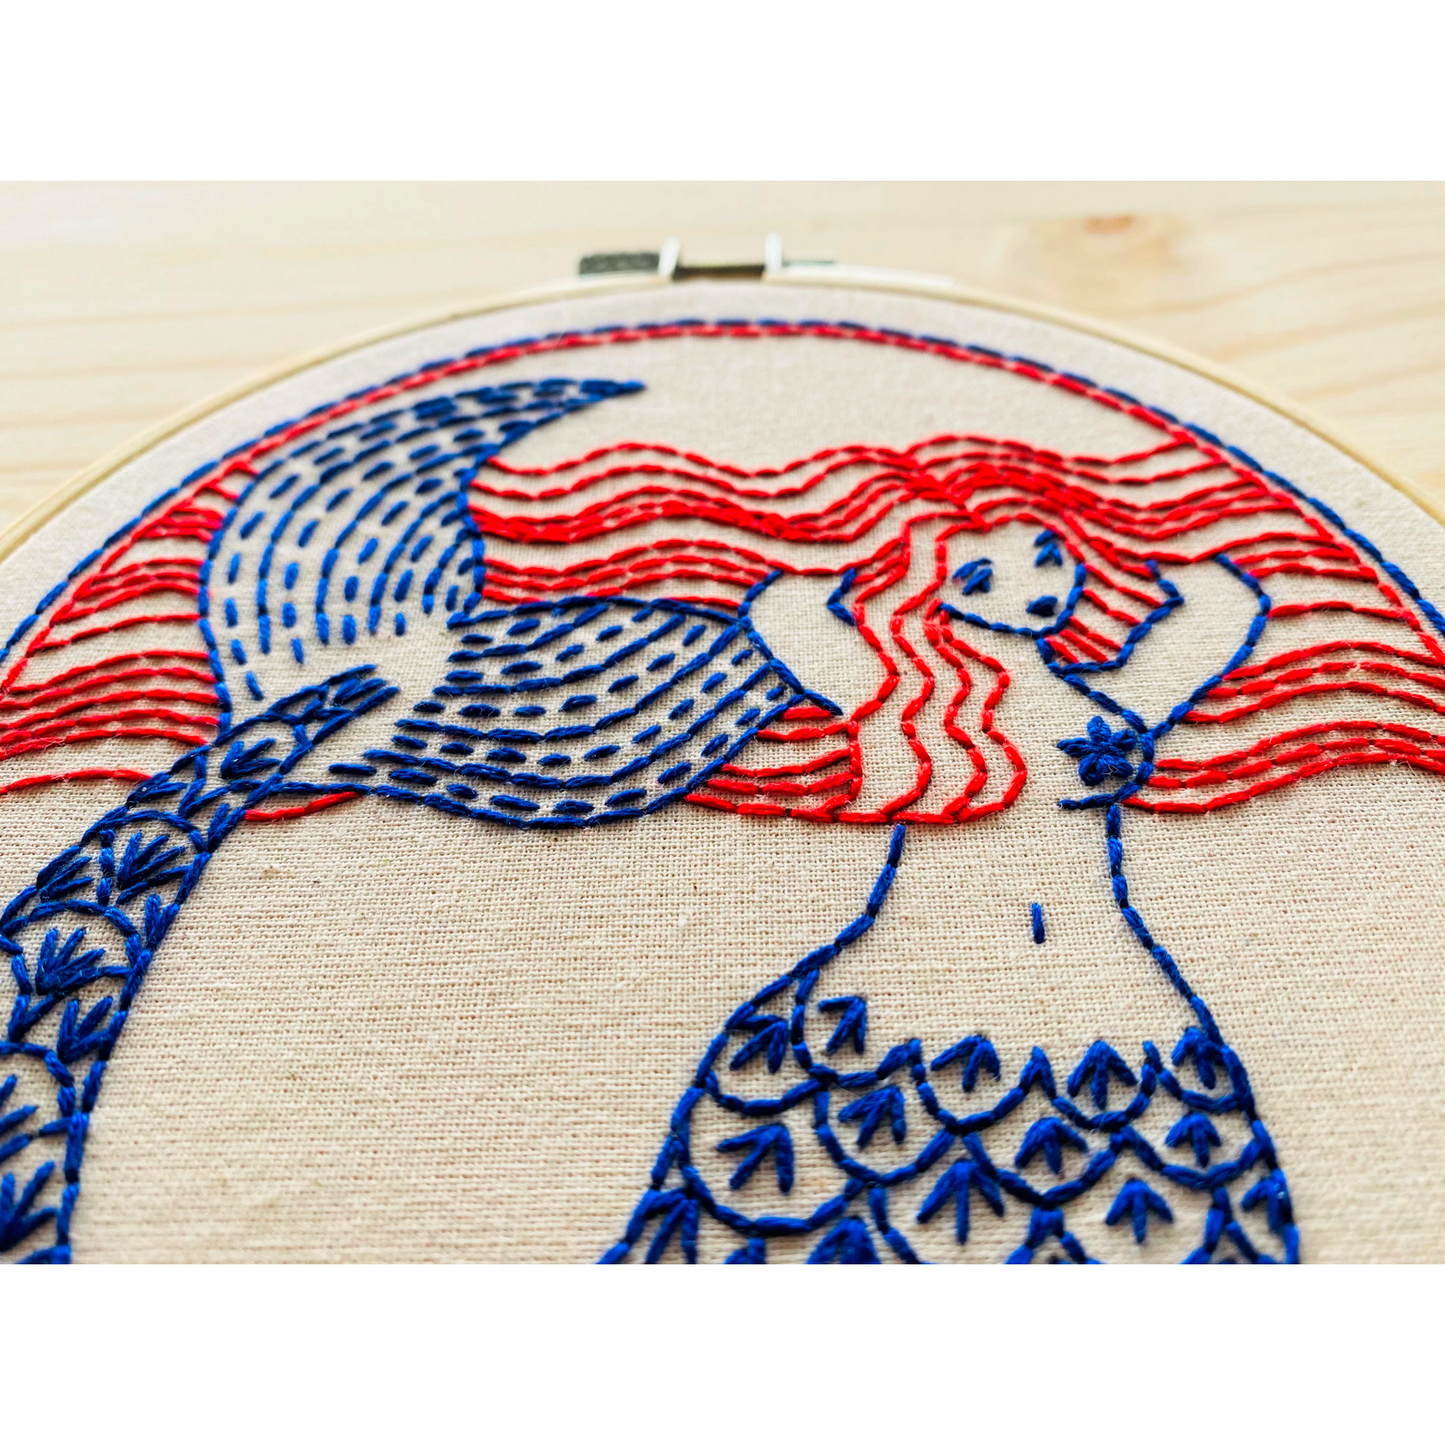 Hook, Line & Tinker ~ Mermaid Hair Don't Care Embroidery Kit